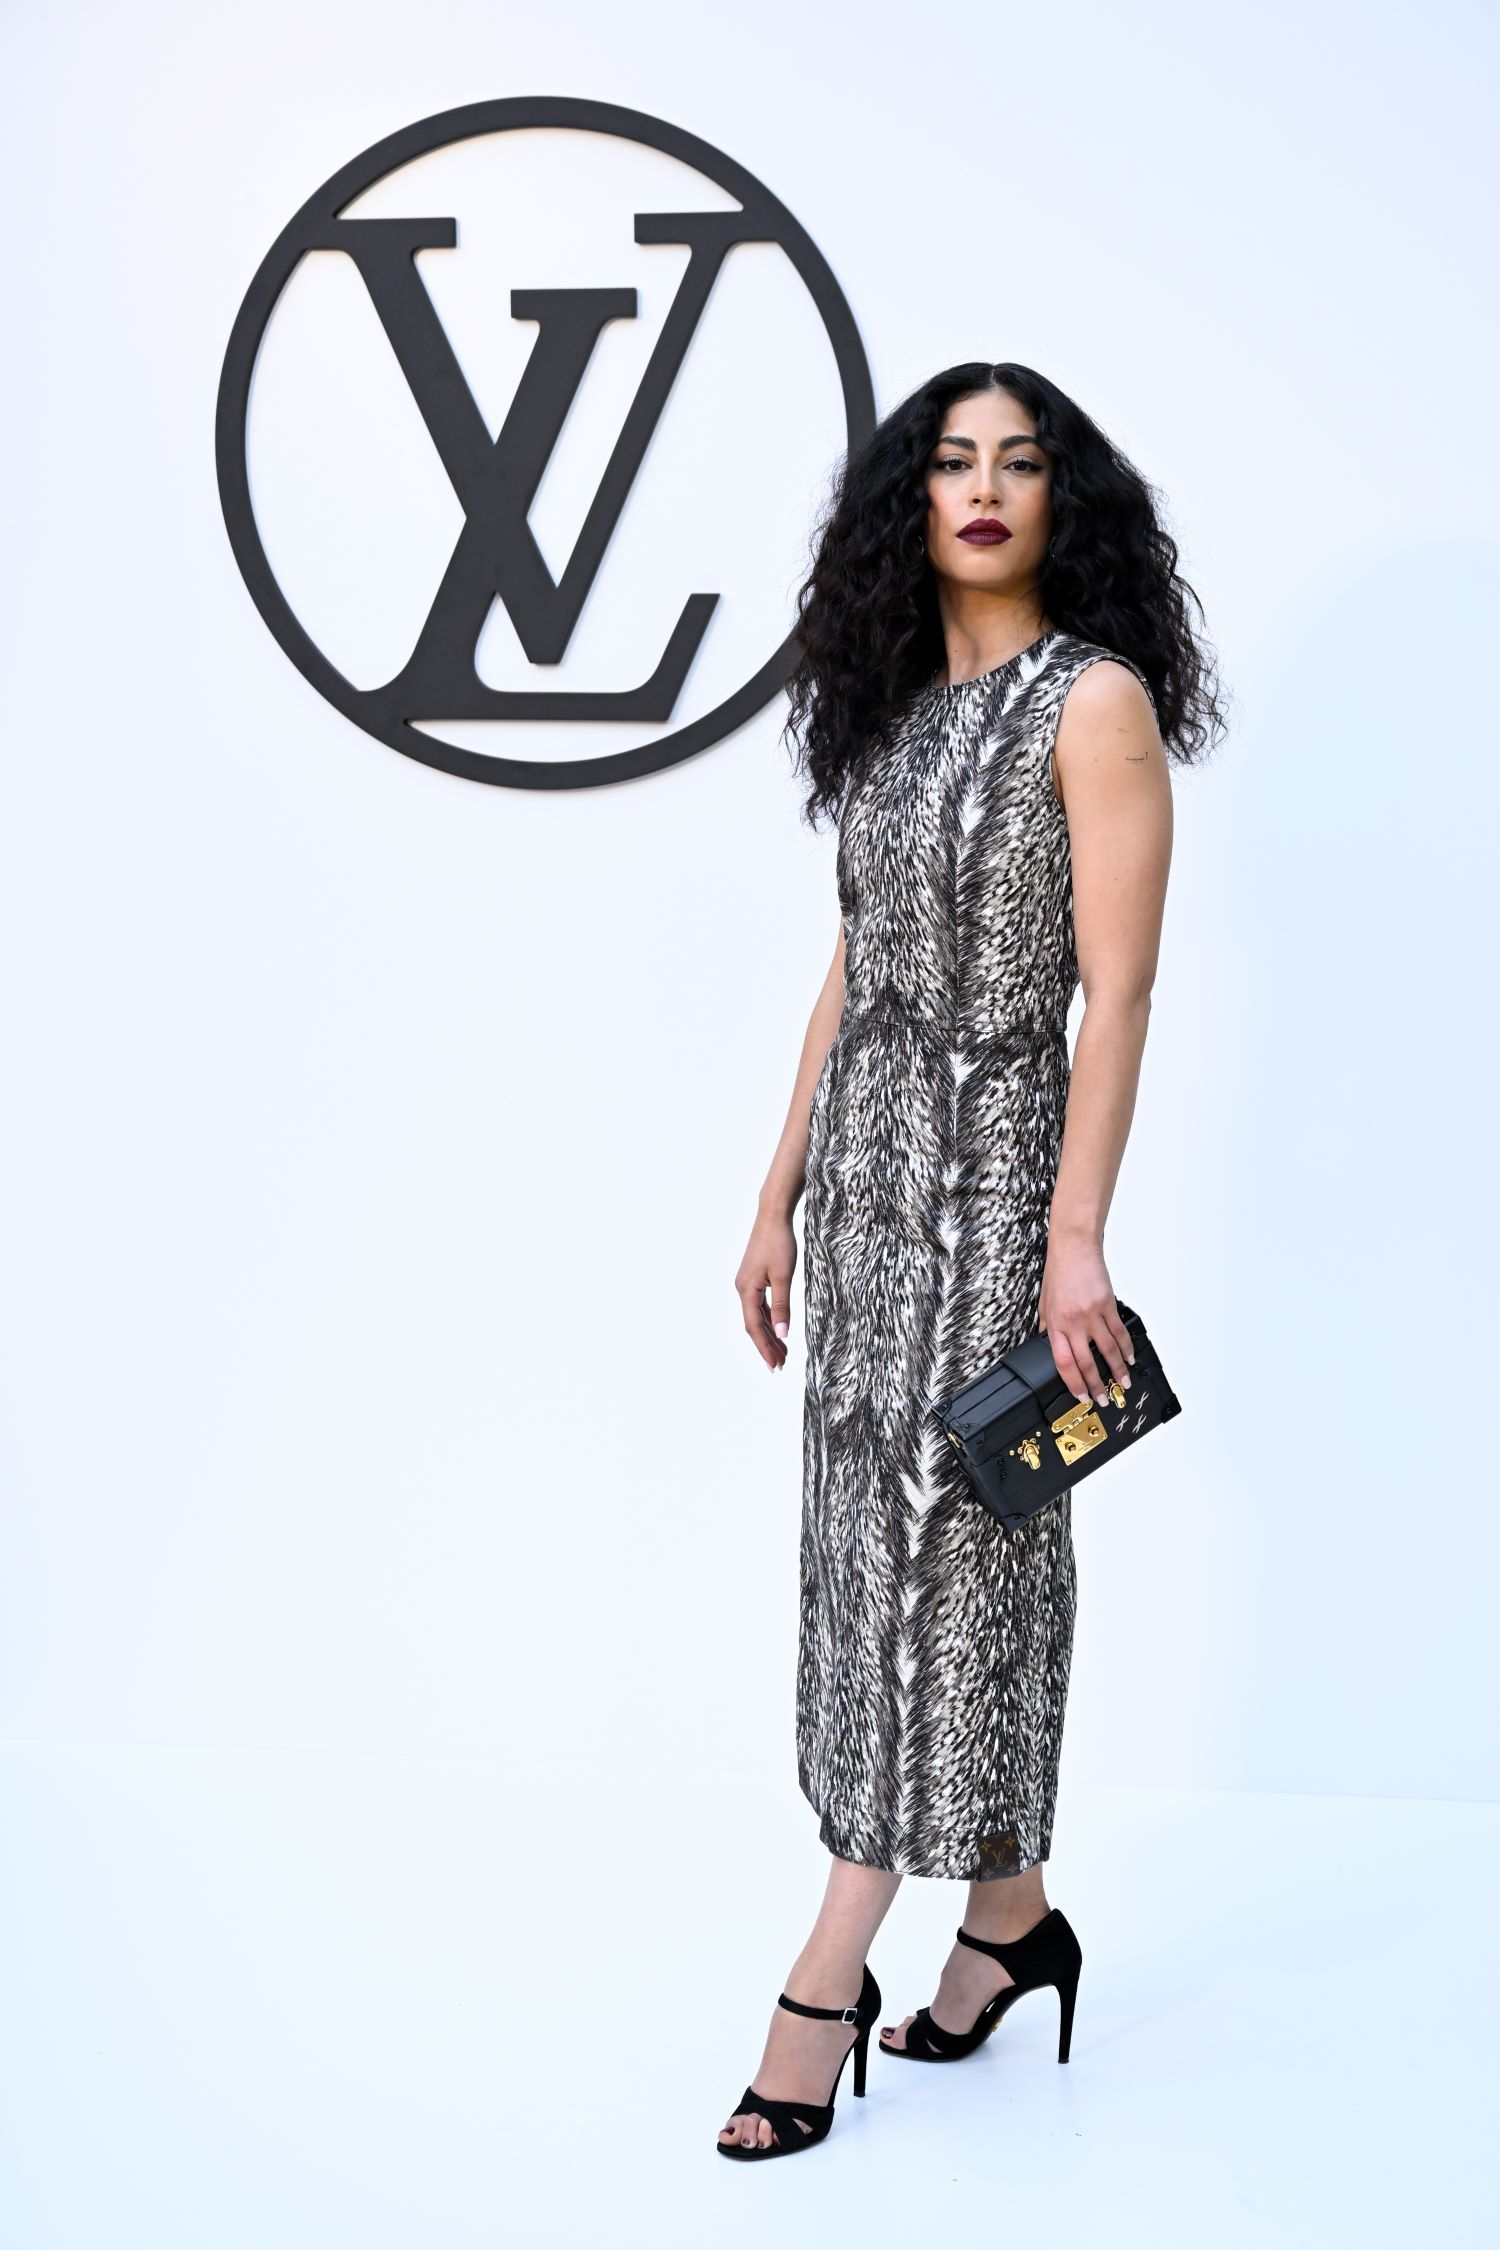 MINA EL HAMMANI attending the Cruise 2025 Fashion Show by Louis Vuitton in Barcelona | CRUISE 2025 FASHION SHOW COLLECTION © Louis Vuitton – All rights reserved | Courtesy of Gnazzo Group.